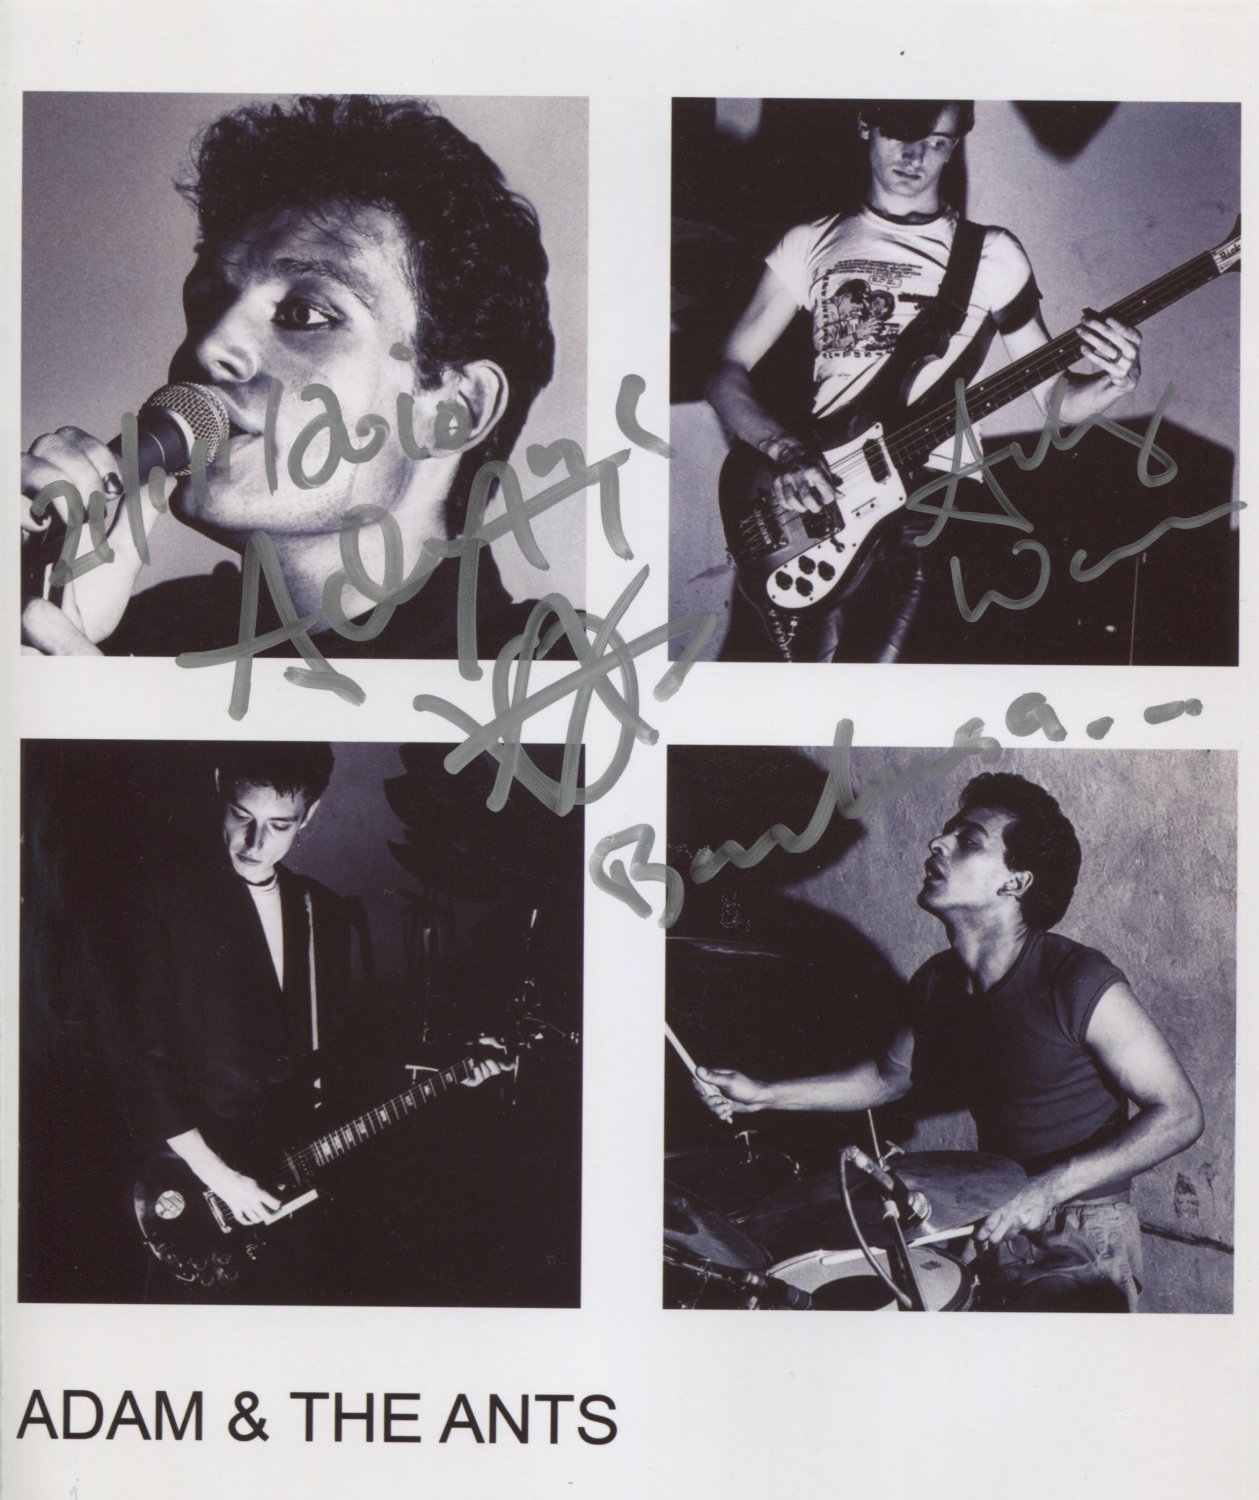 Adam Ant & The Ants SIGNED Photo + Certificate Of Authentication 100% Genuine Photo Proof